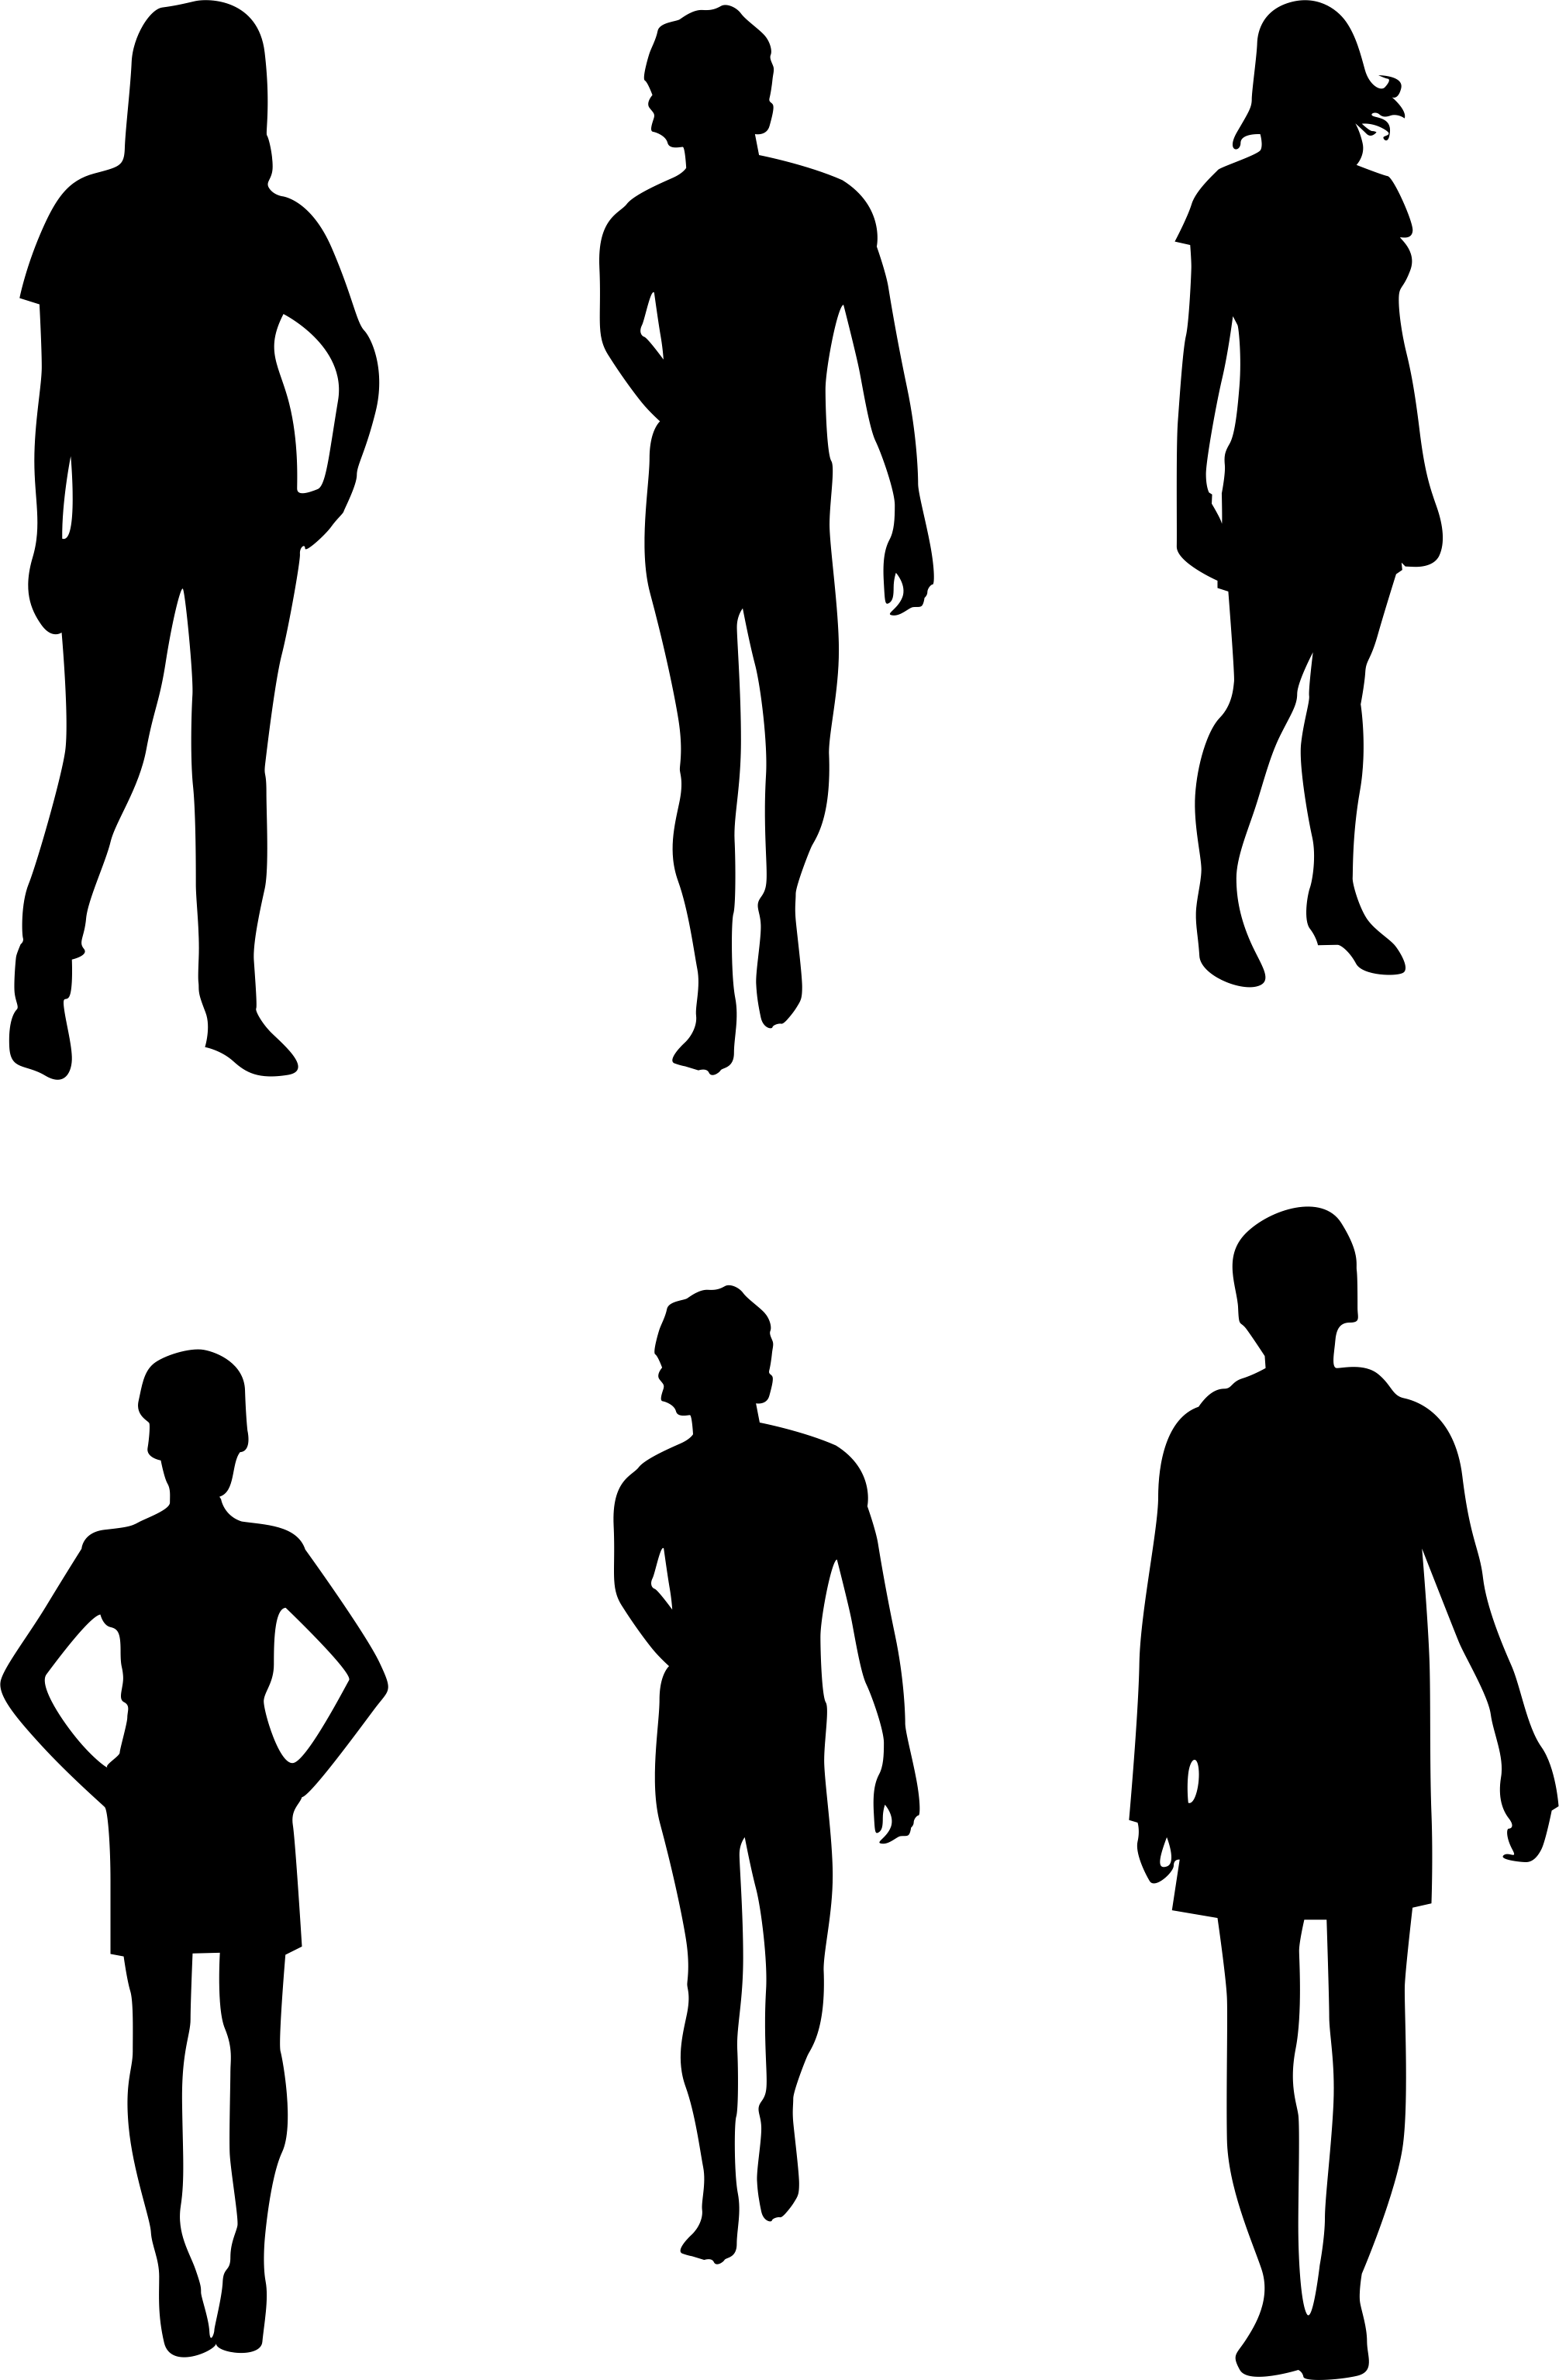 Party People Silhouette | Clipart Panda - Free Clipart Images